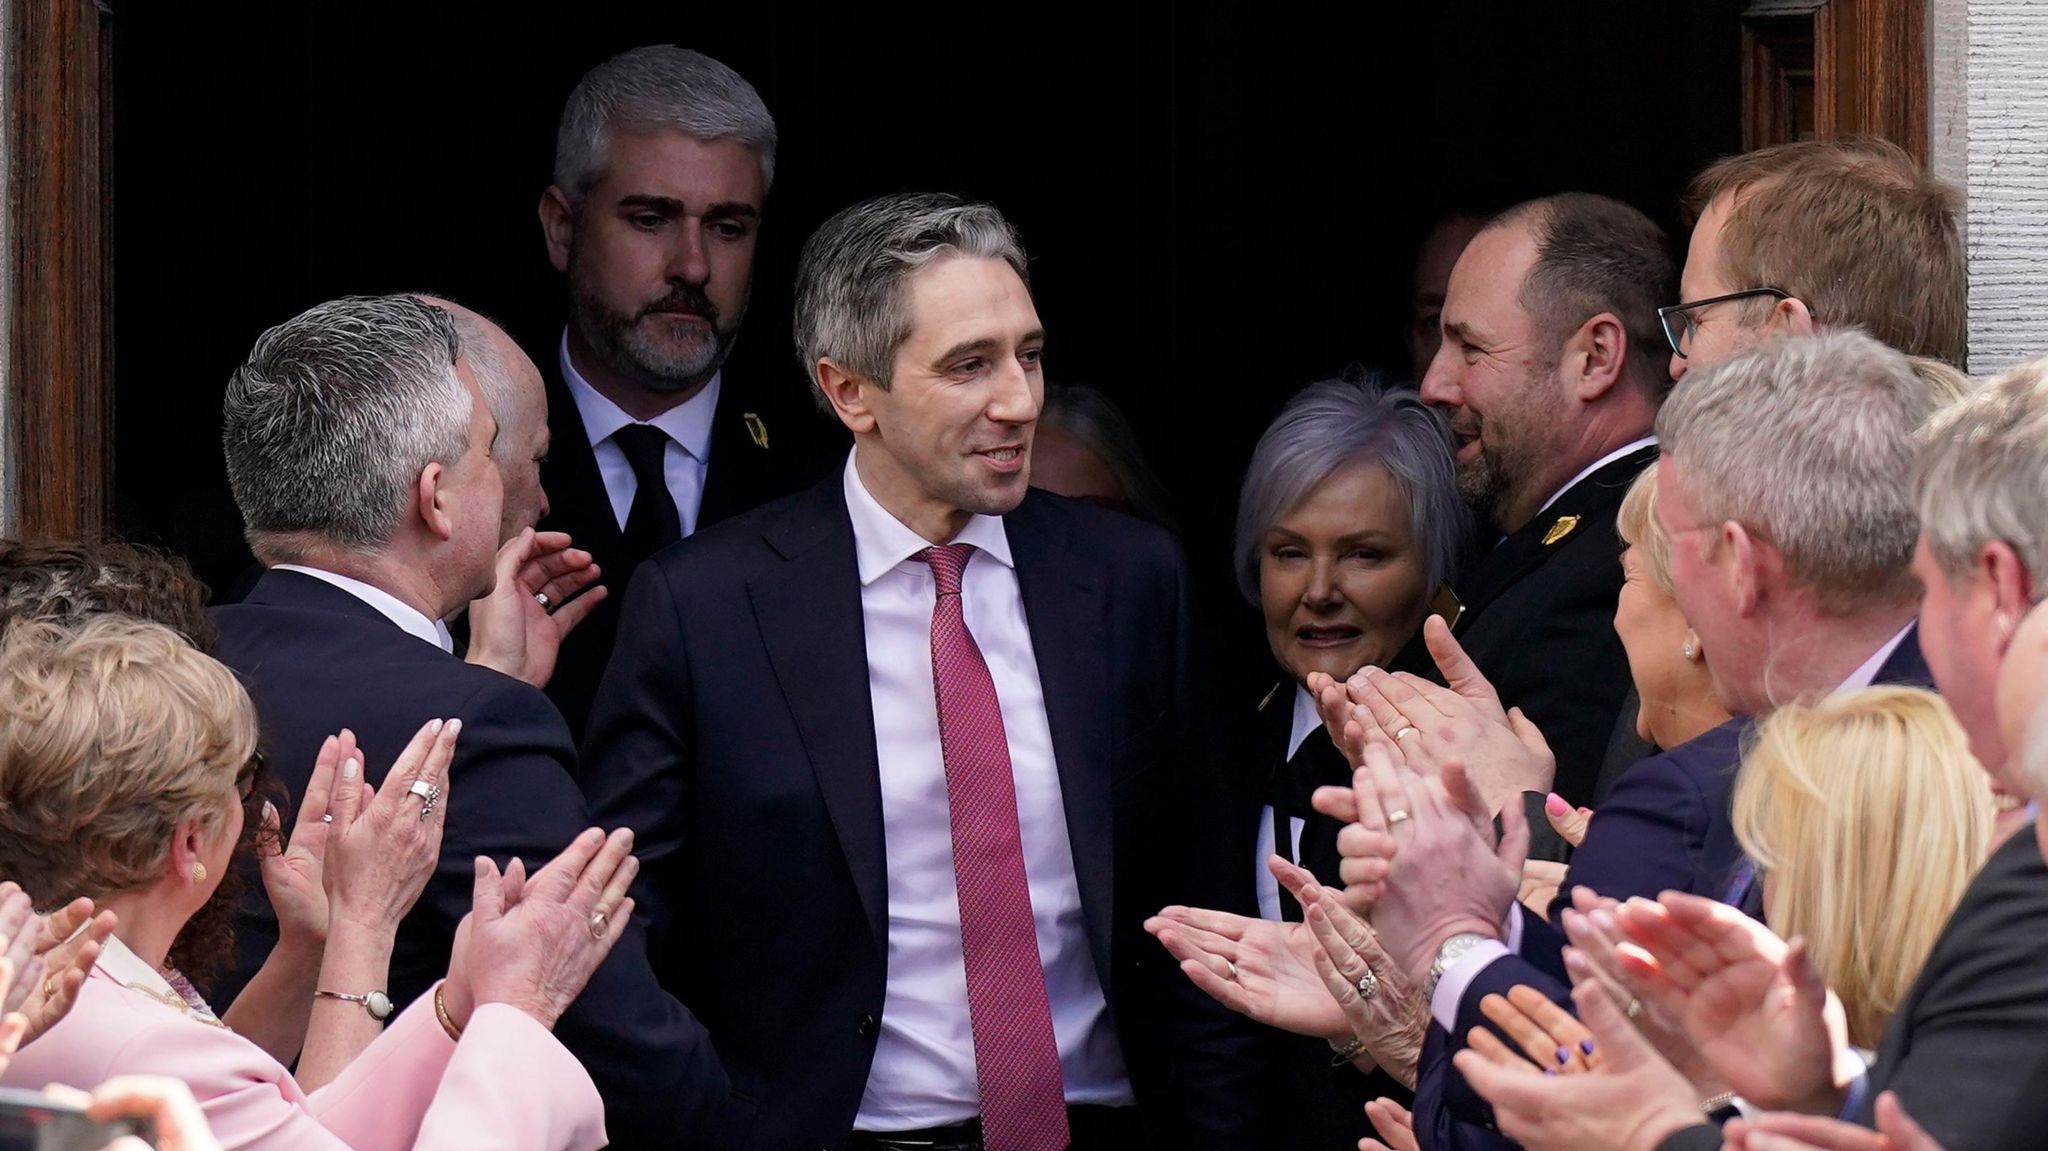 Simon Harris was applauded as he left the Dáil after his election